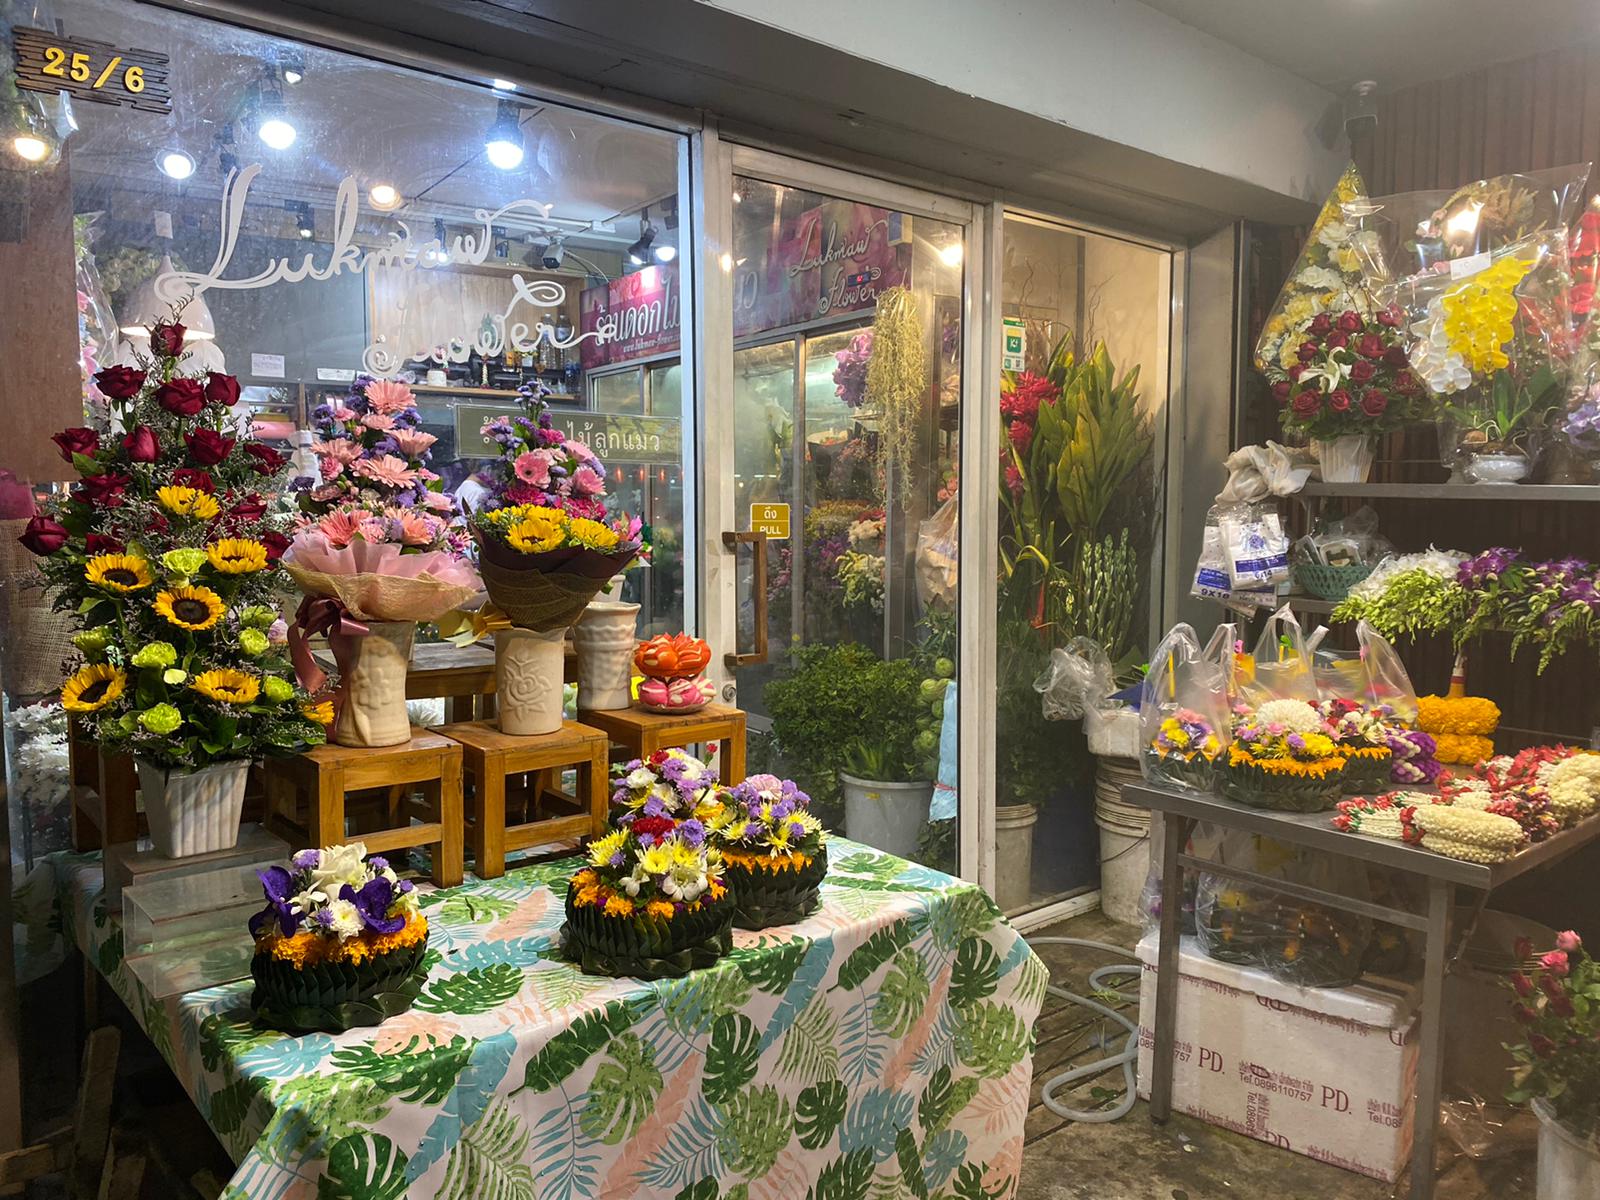 Nichapat Konchit’s flower shop was selling krathongs out front Monday evening. Photo: Coconuts 